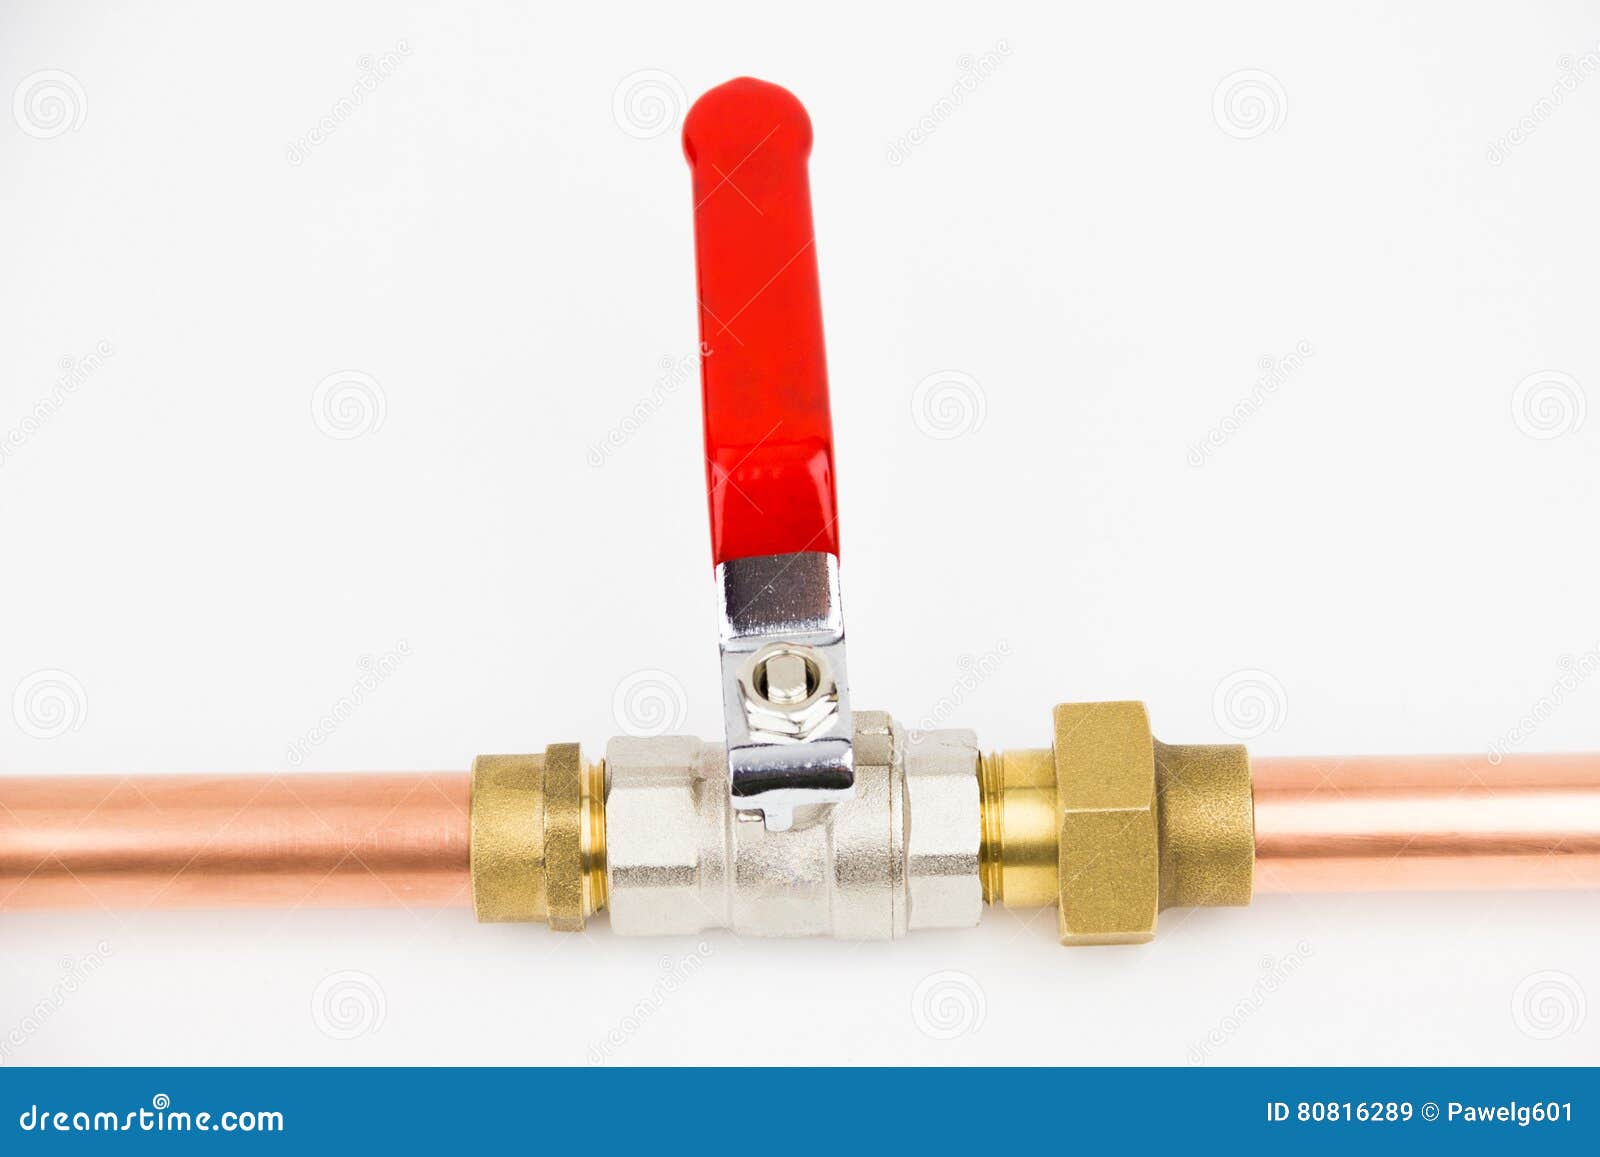 The Ball Valve And Copper Pipe Stock Image - Image of straight